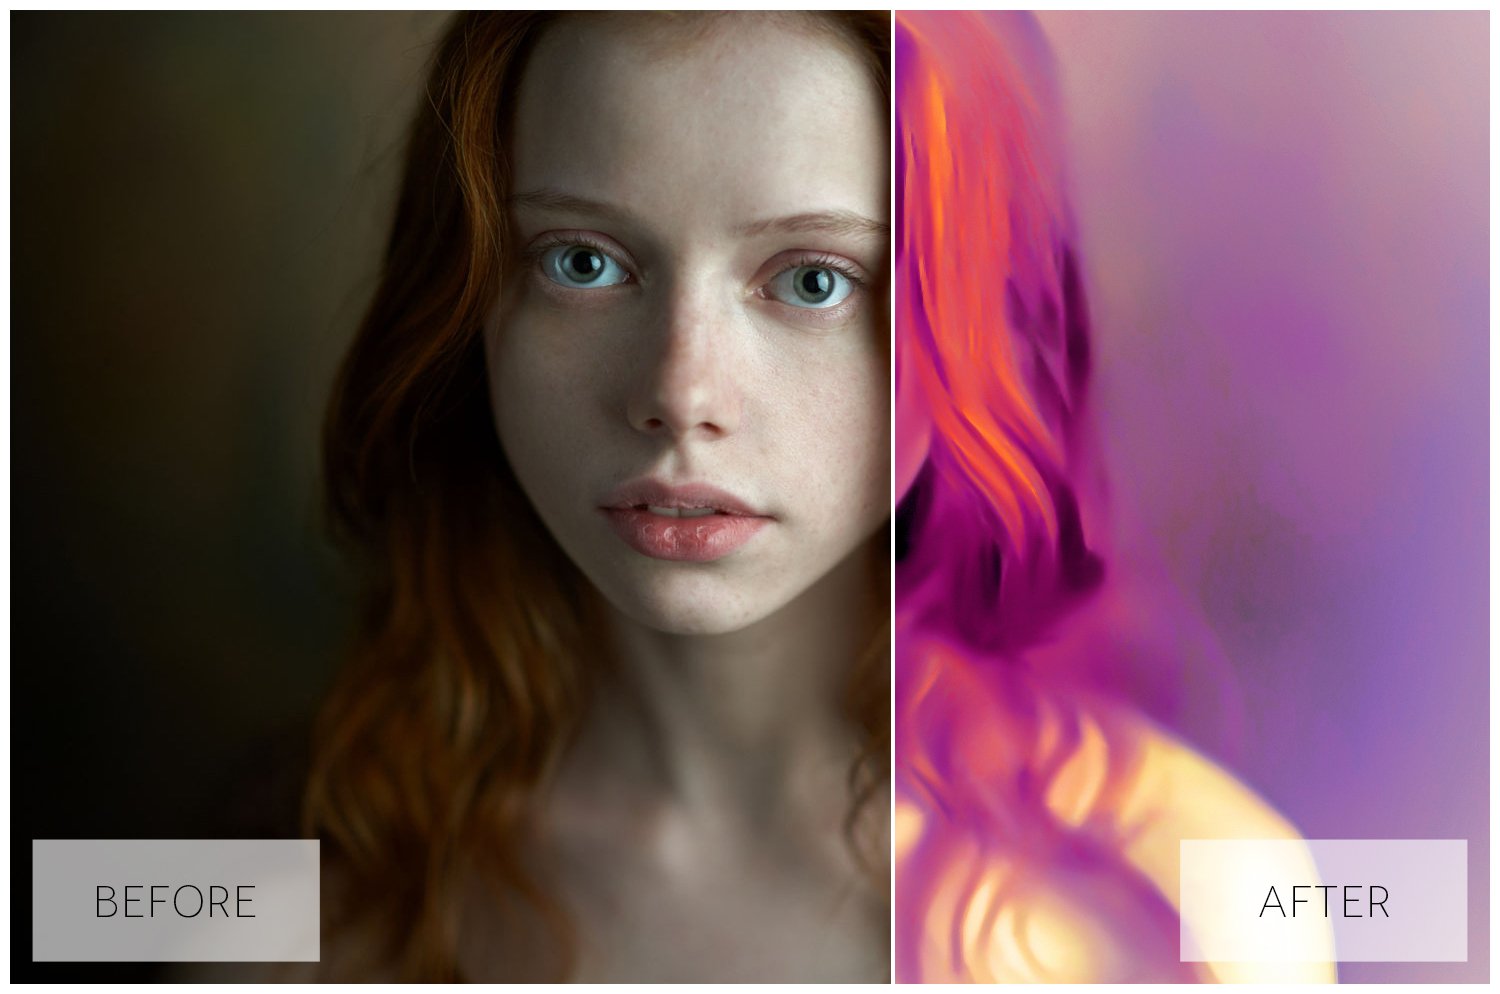 4. before after lovely oil painting effect actions 736